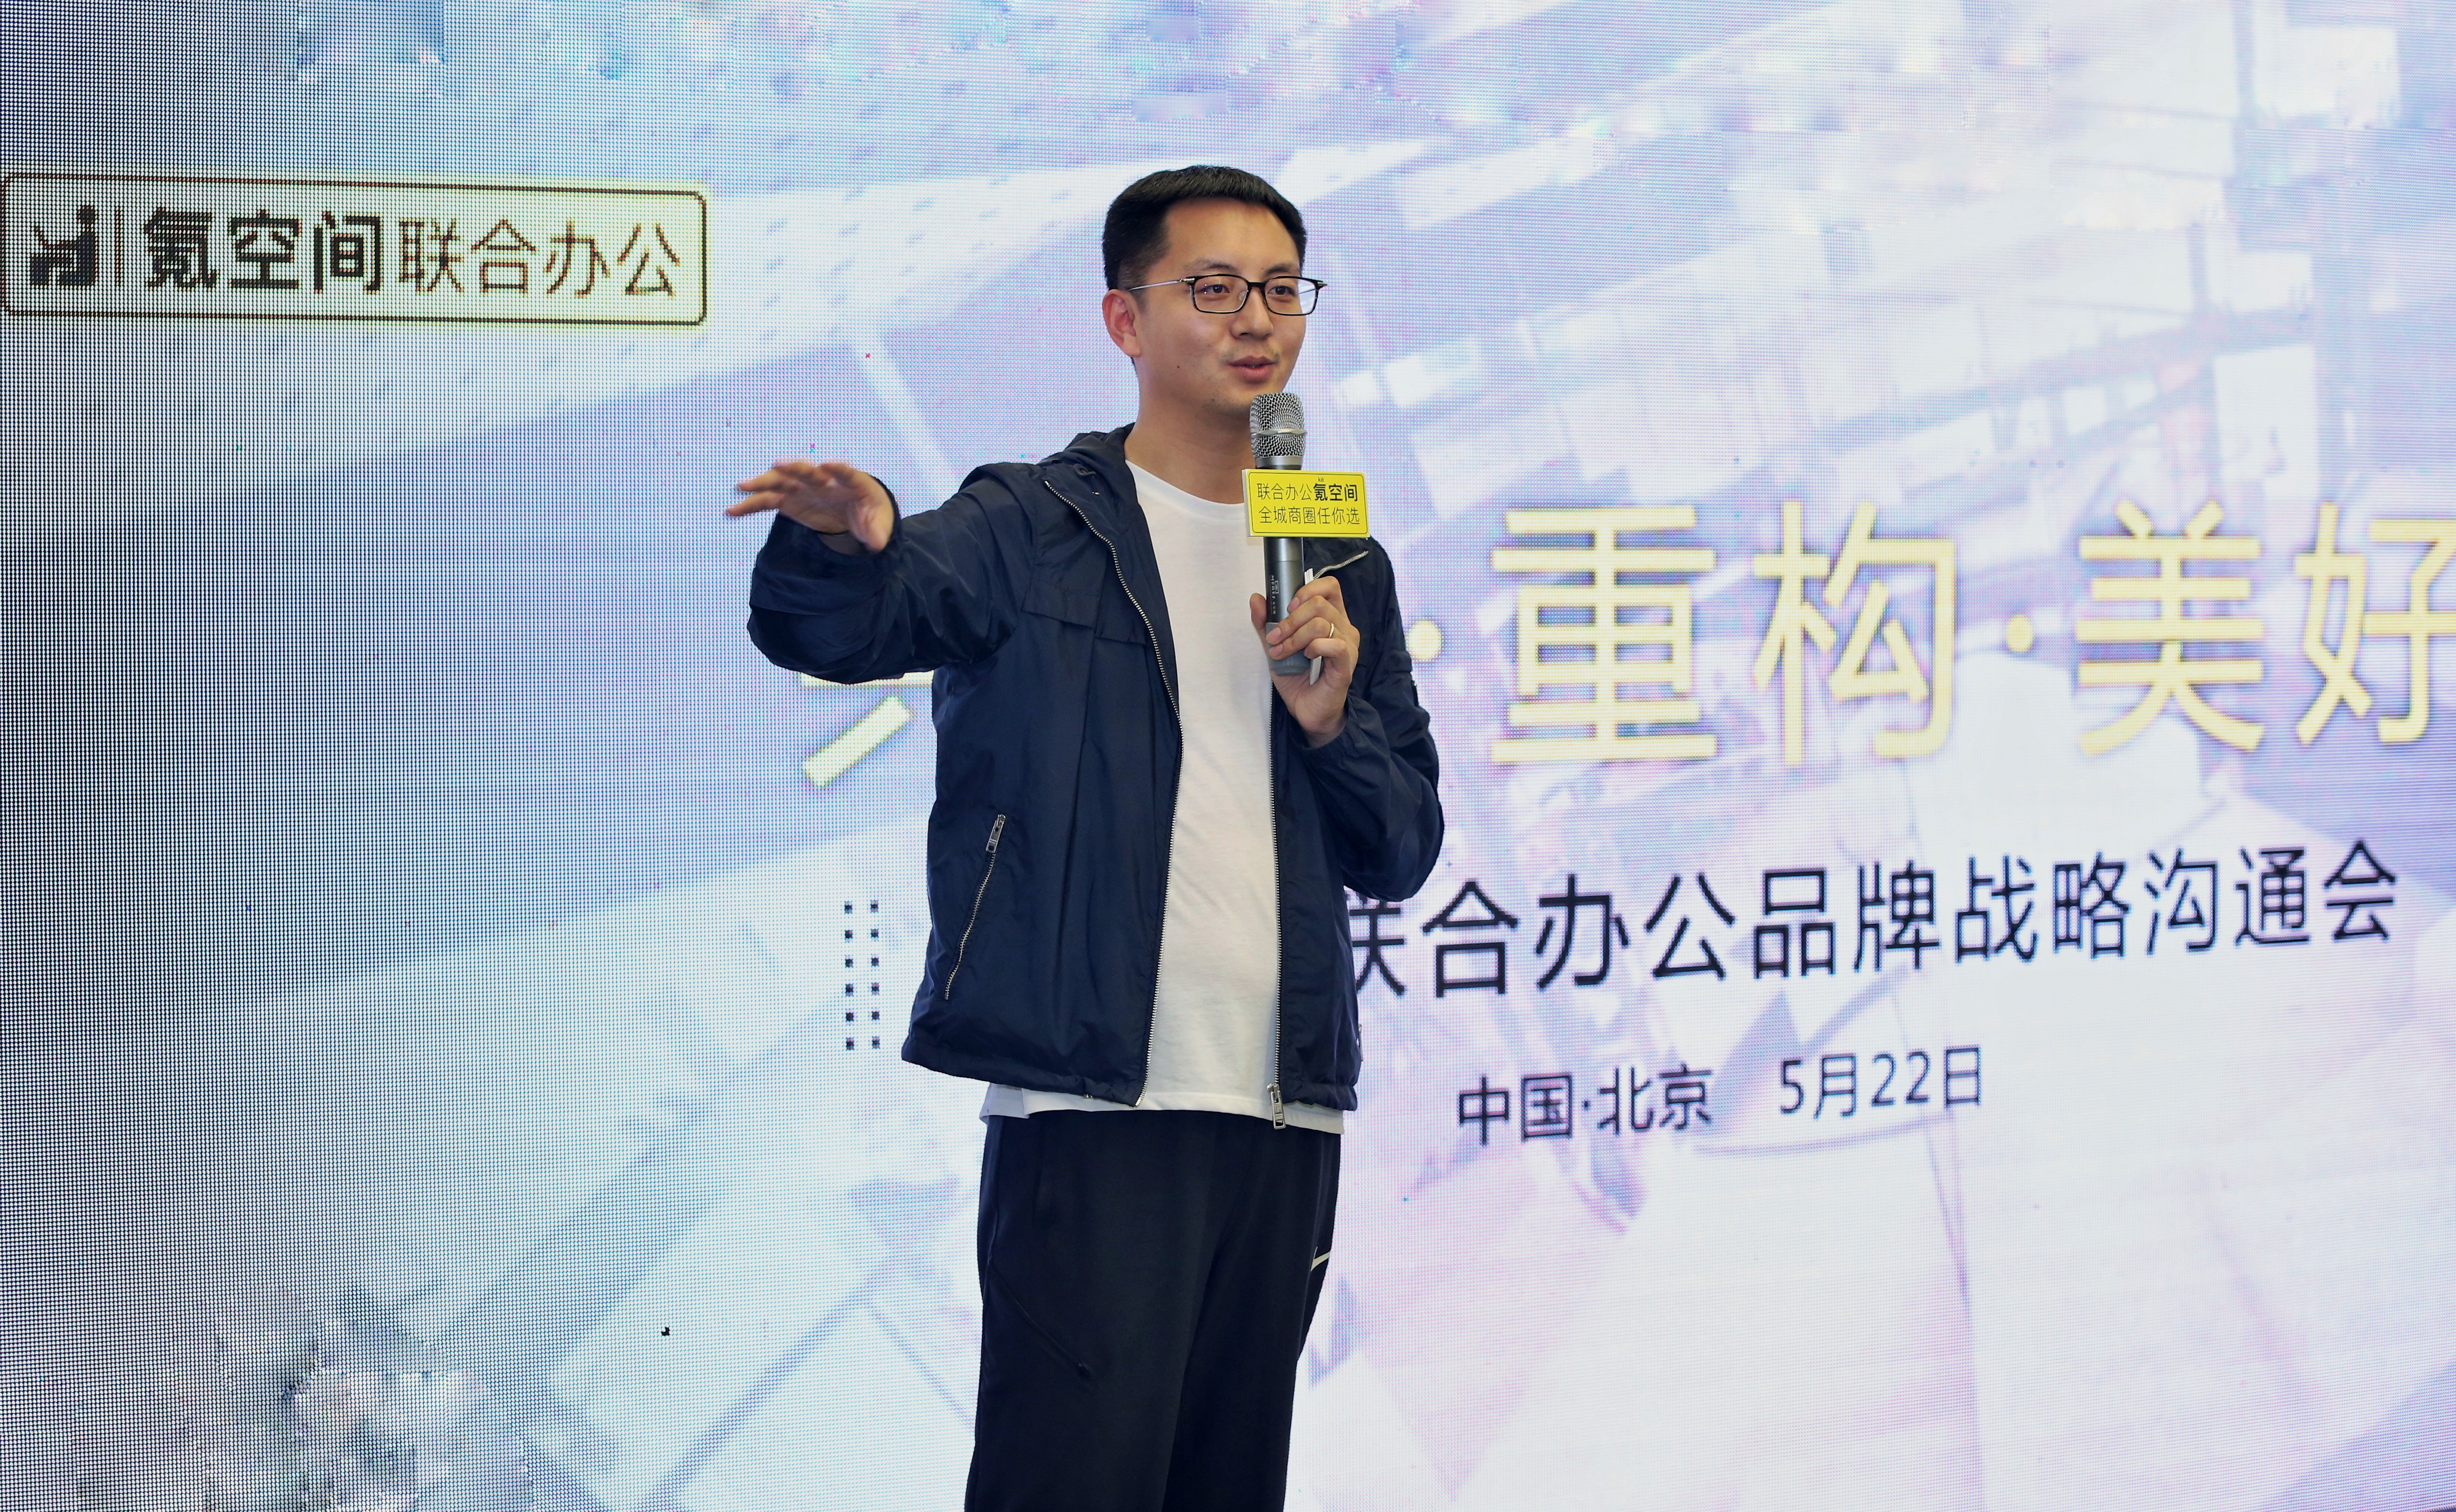 Liu Chengcheng, chairman and founder of Kr Space. Photo: Handout